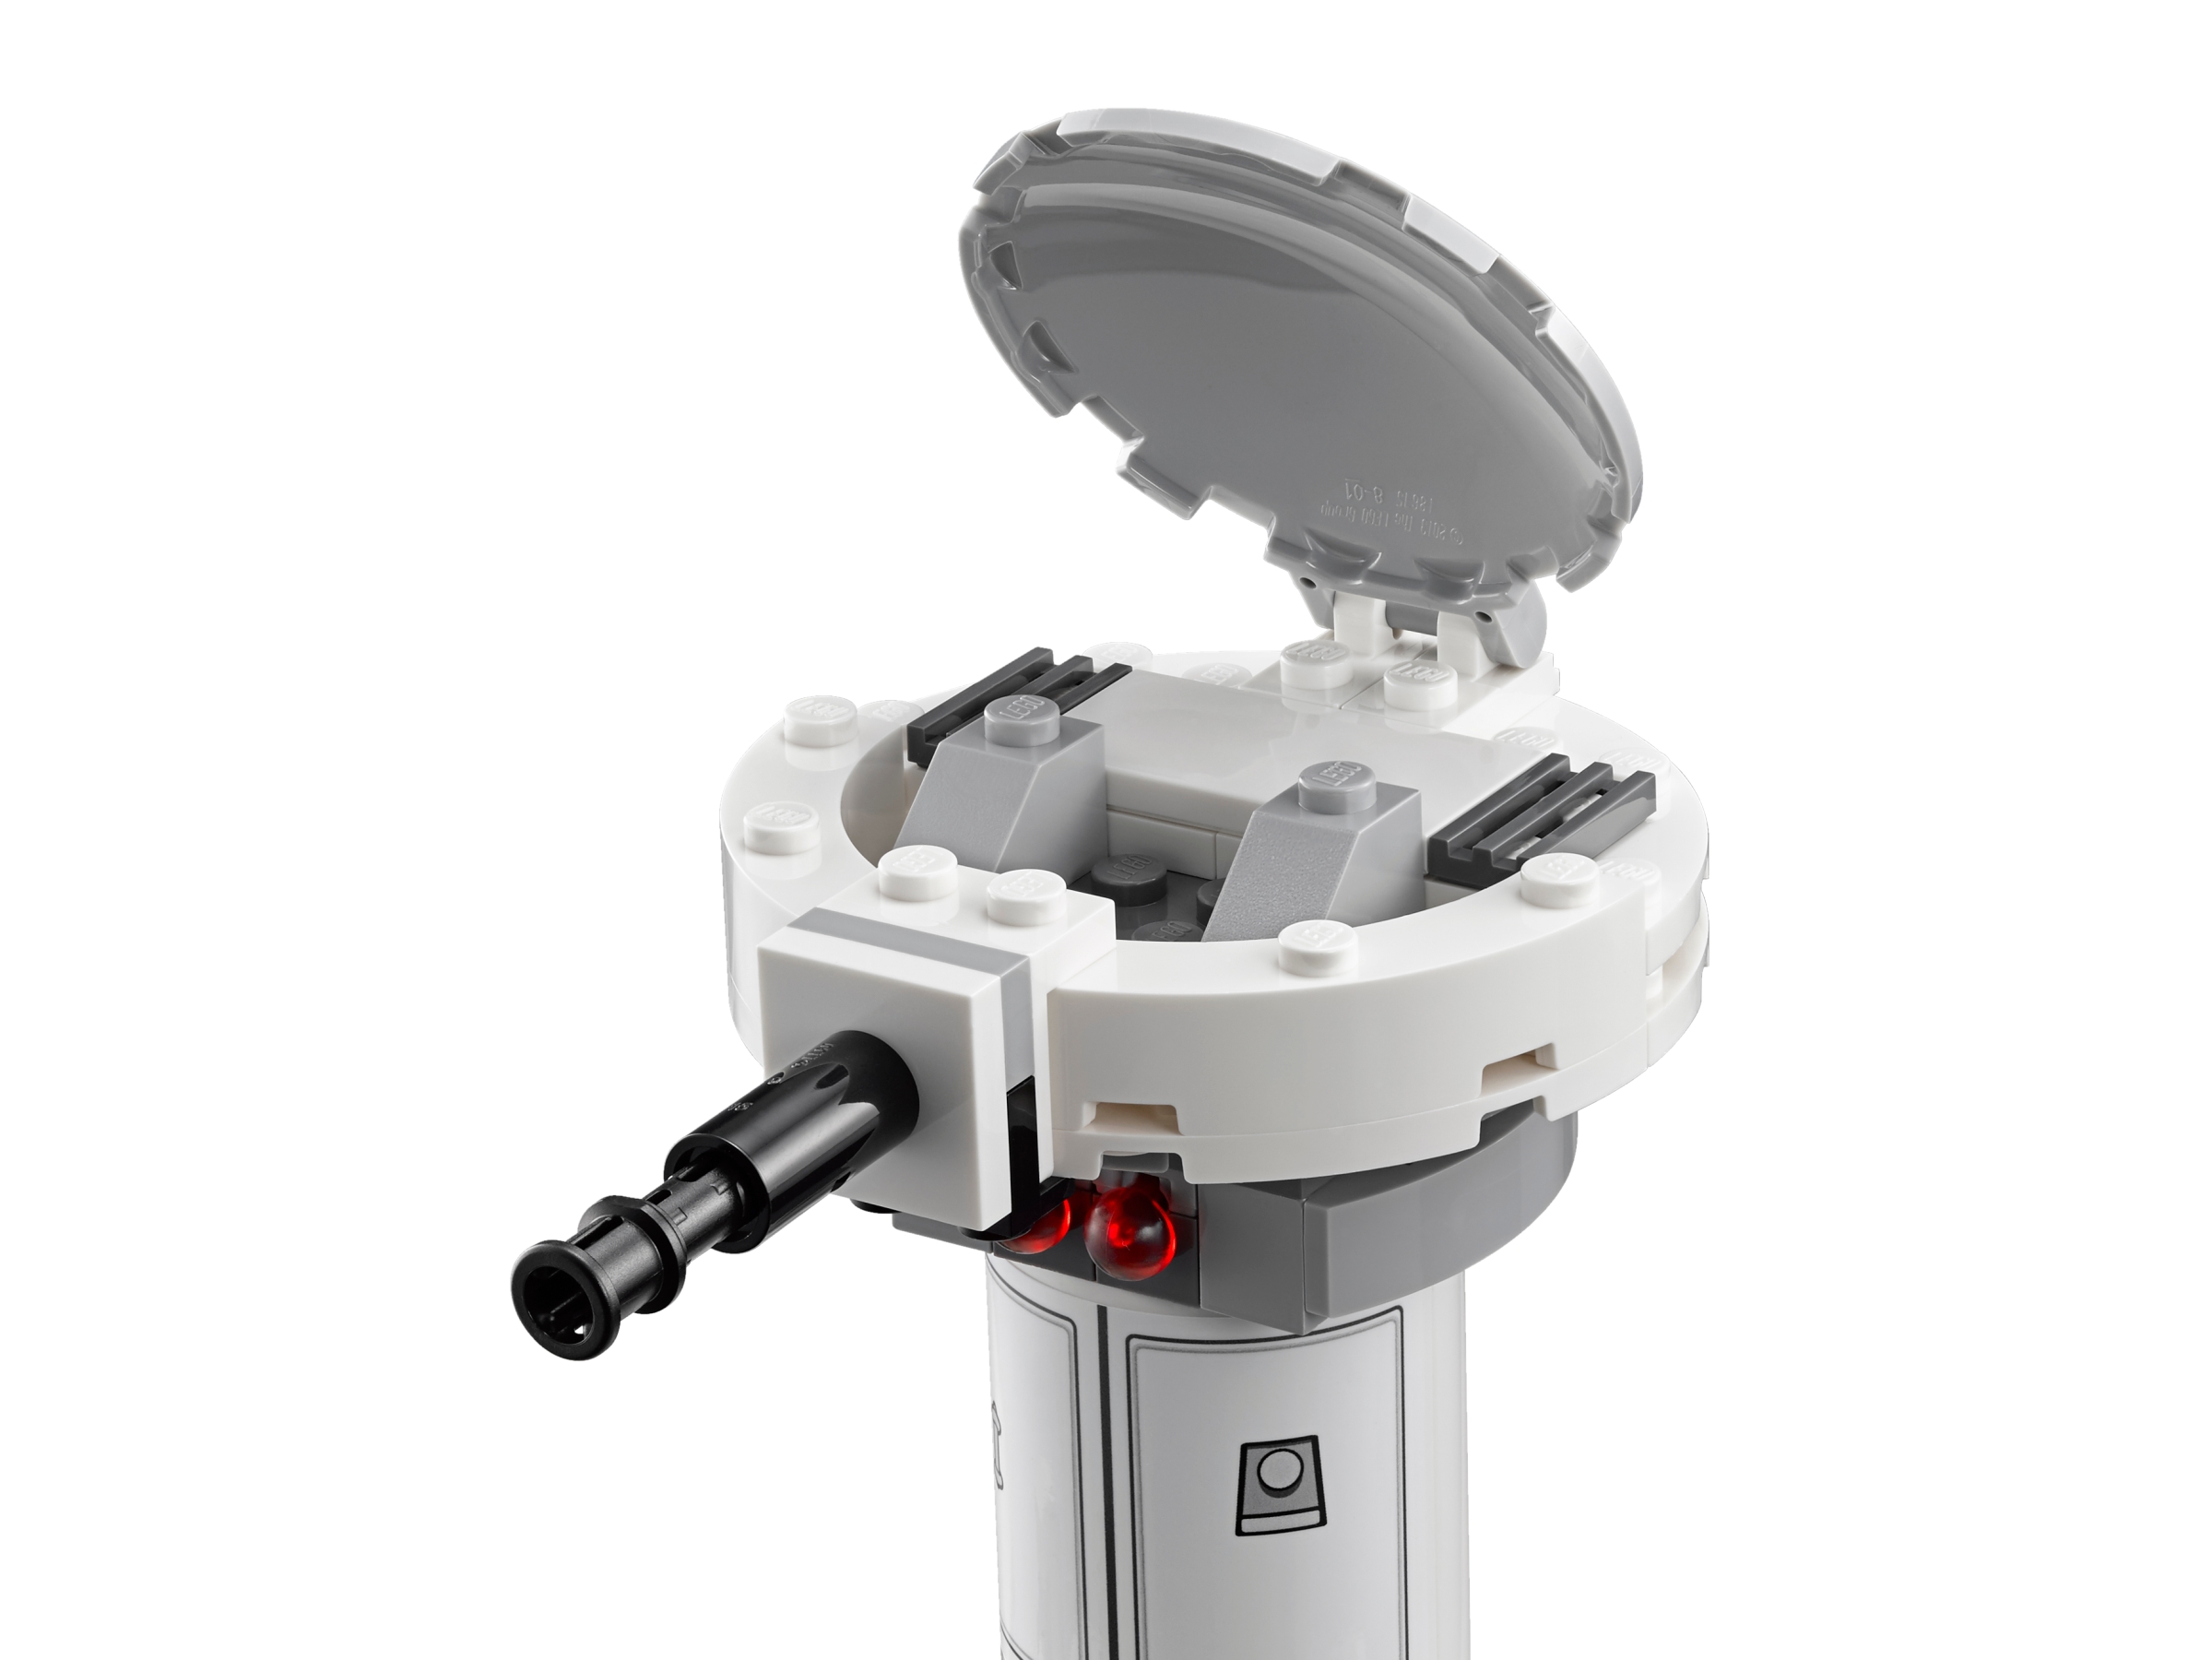 LEGO Star Wars Hoth Attack for sale online 75138 233 Pieces 